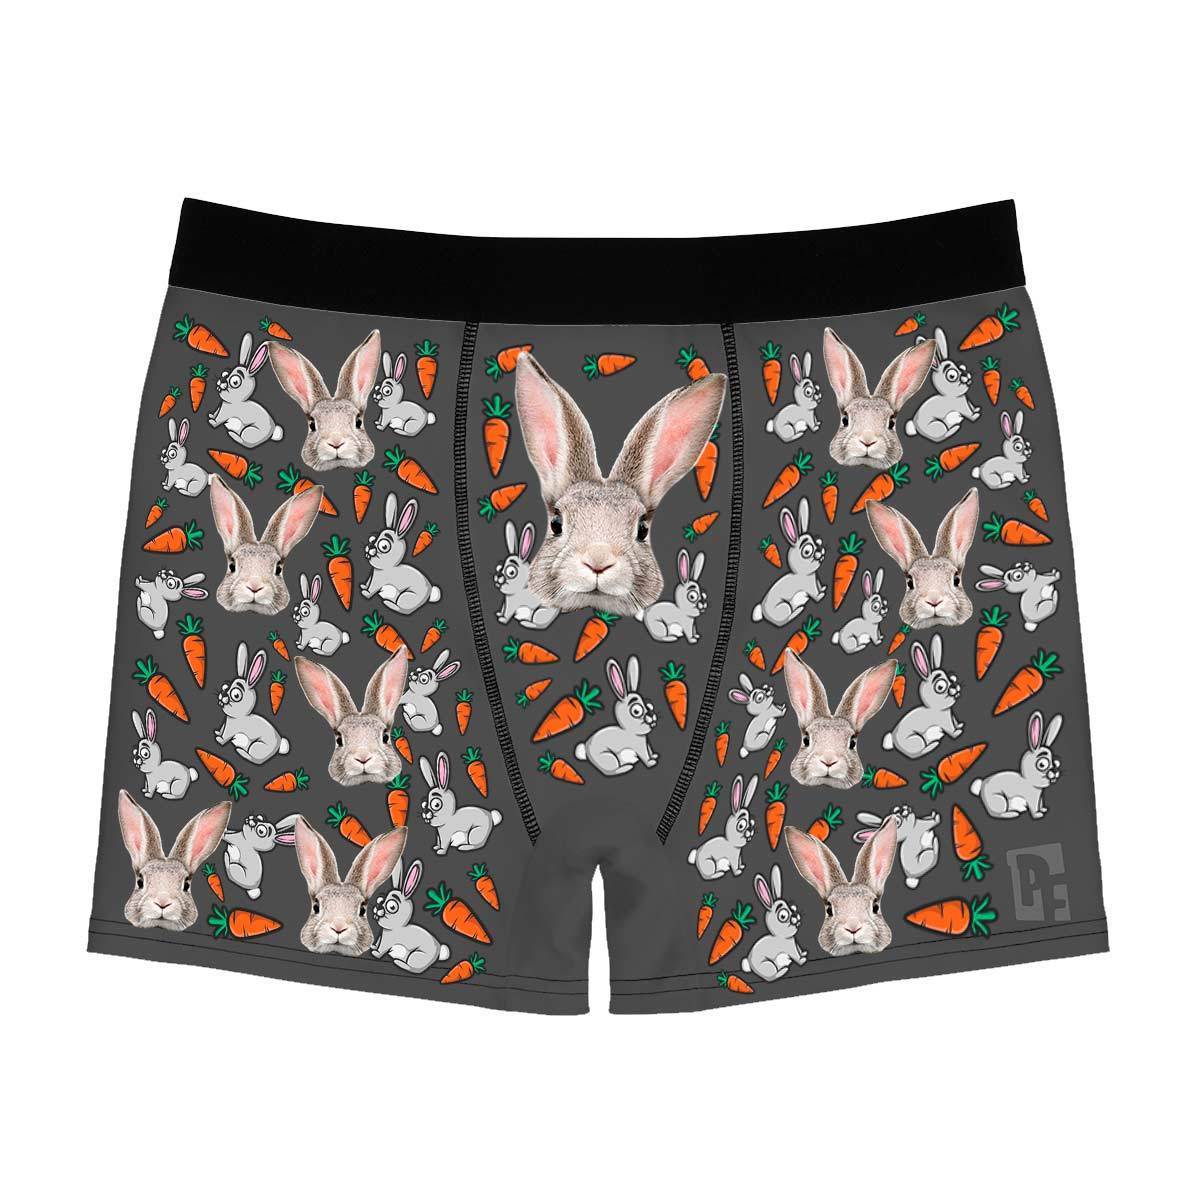 Dark Bunny men's boxer briefs personalized with photo printed on them